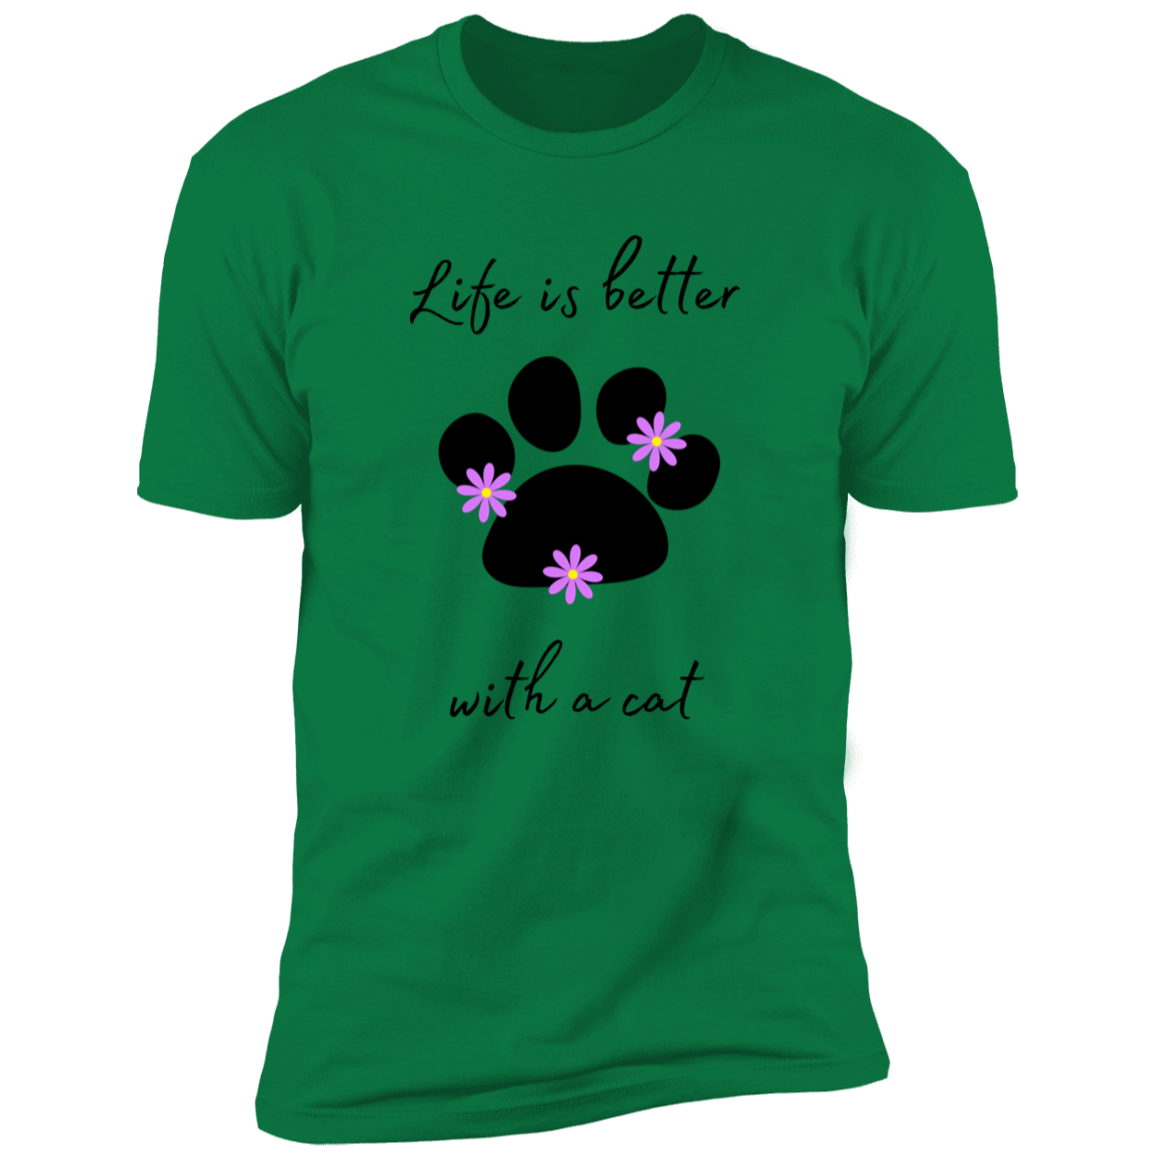 Life is Better with a Cat (Flower) cat t-shirt, cat shirt for humans, cat themed t-shirt, in kelly green